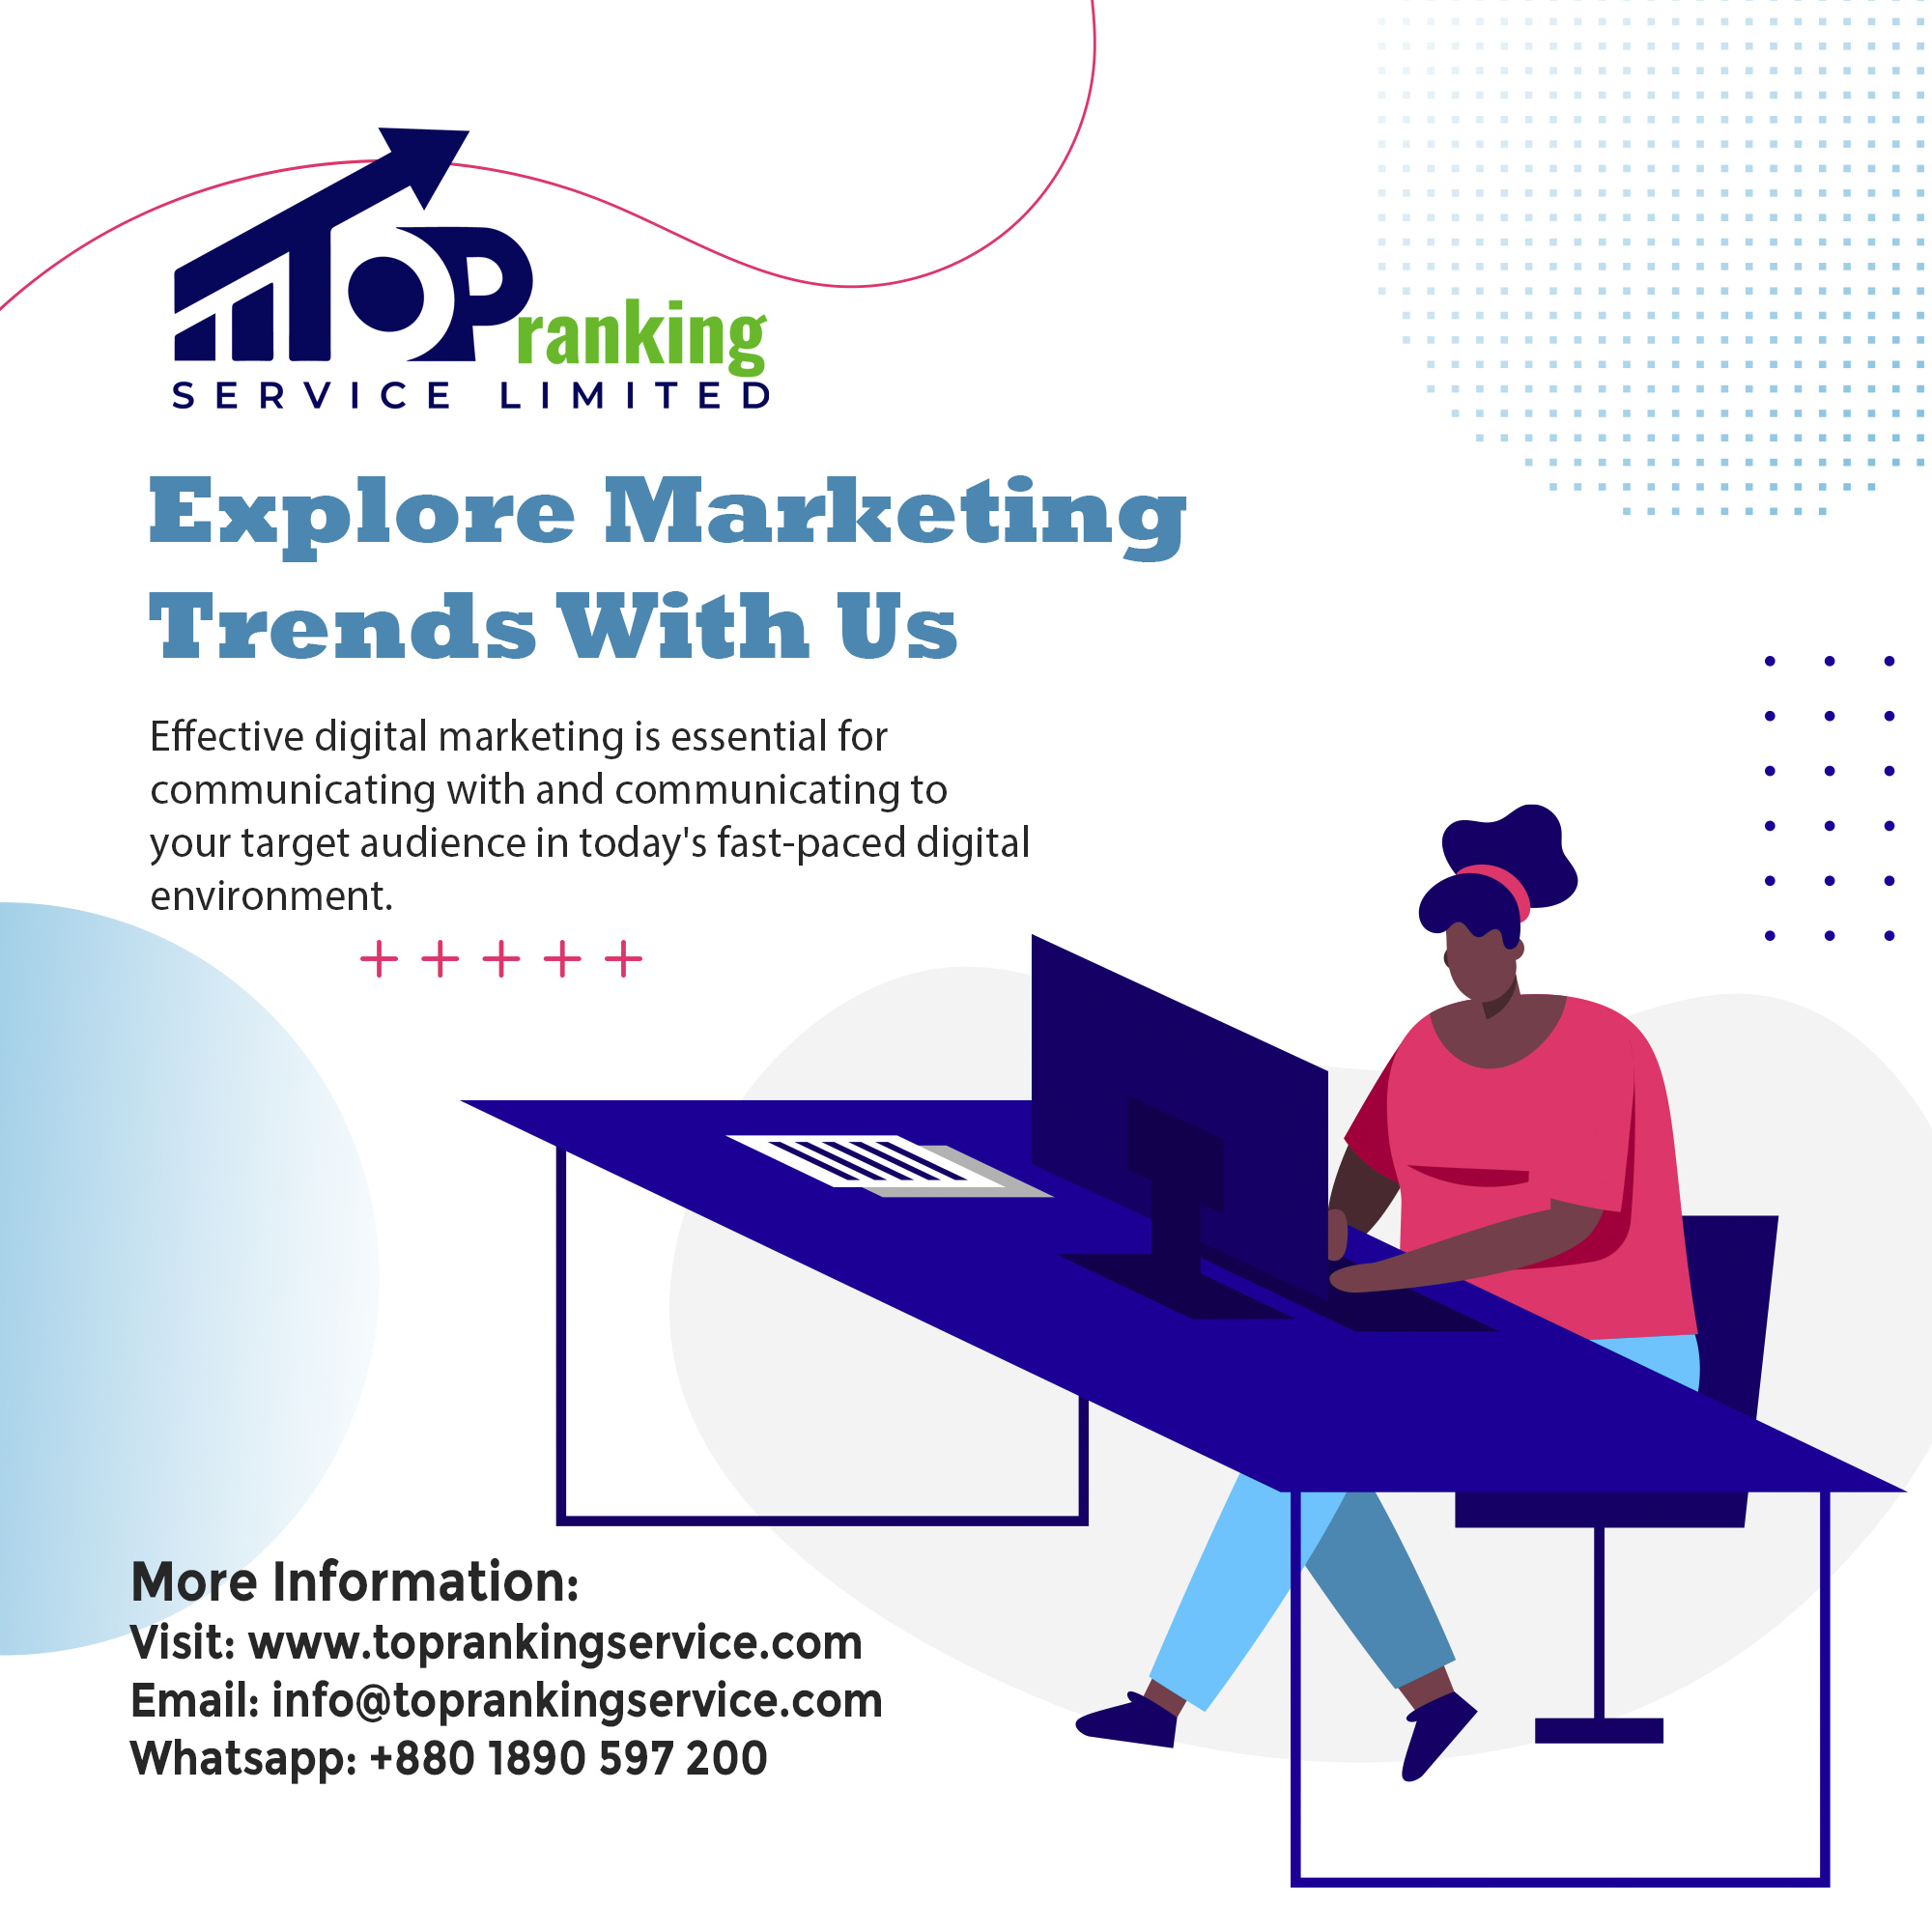 Leading digital marketing company Top Ranking Service Ltd. helps businesses succeed through creative tactics and campaigns.